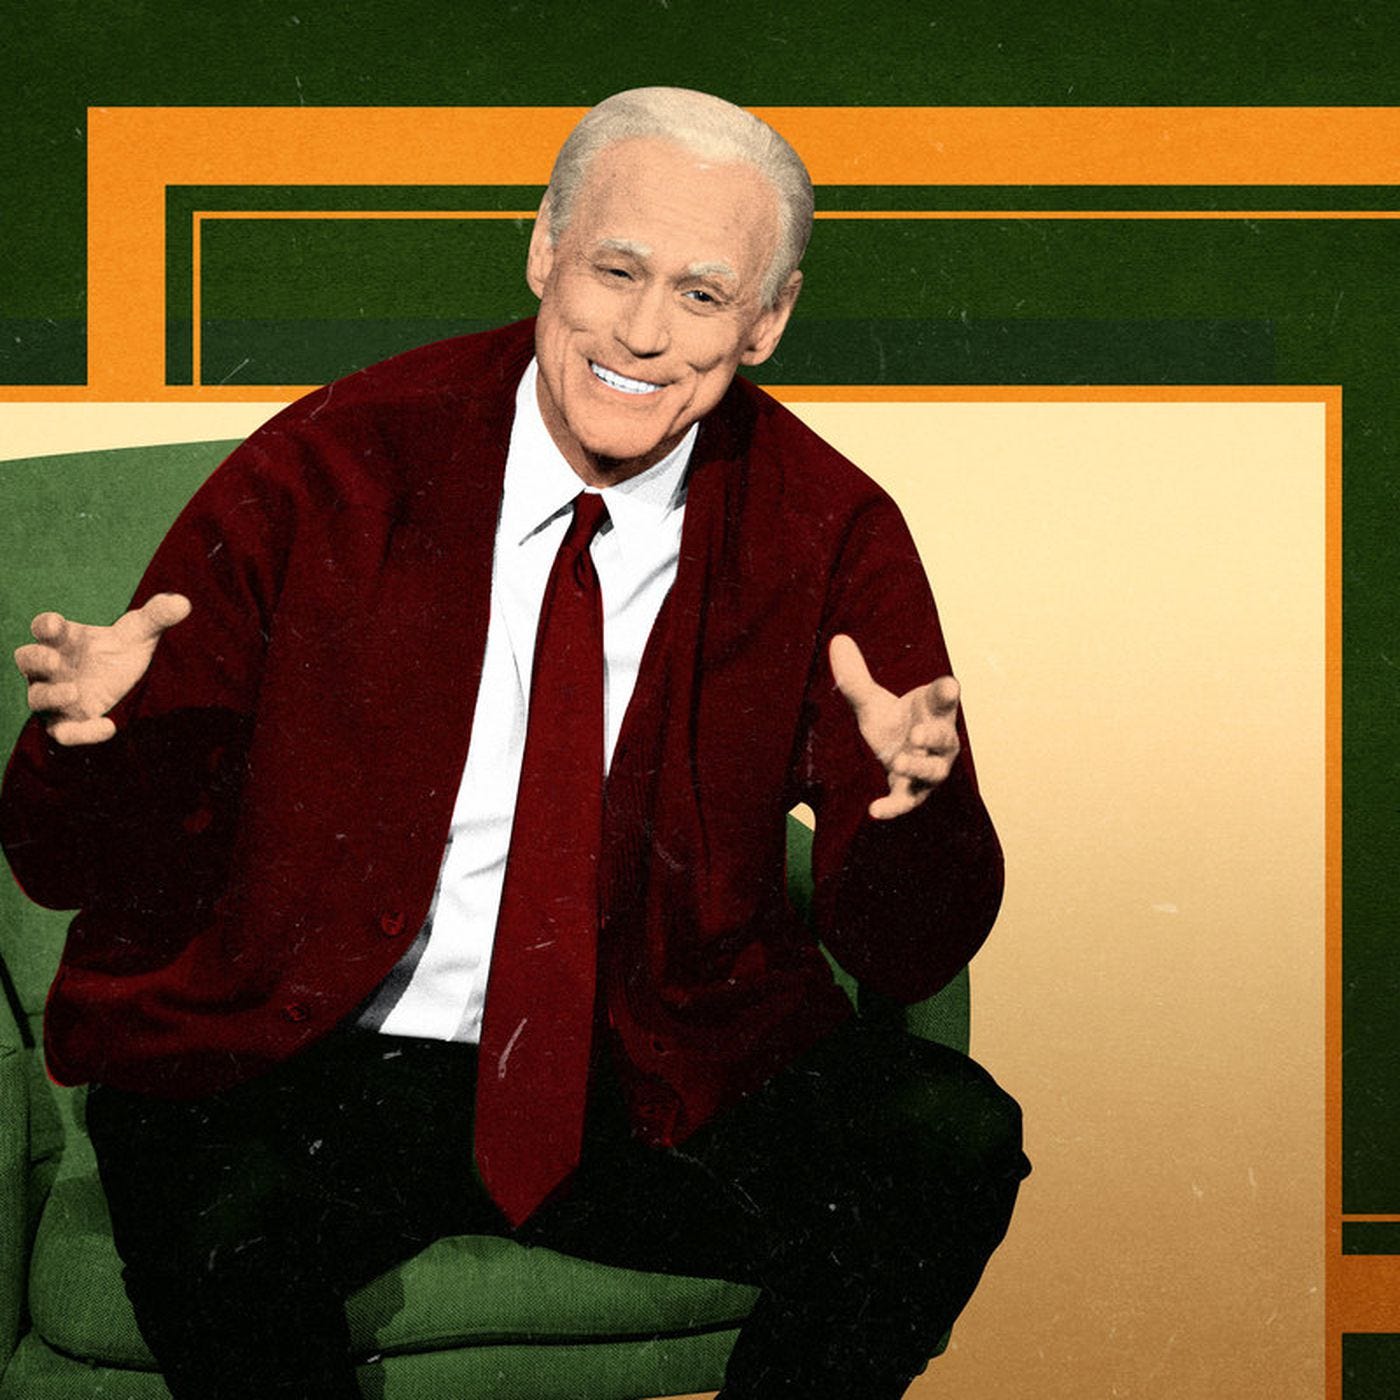 Why Has Jim Carrey's 'SNL' Joe Biden Been Such a Disaster? - The Ringer